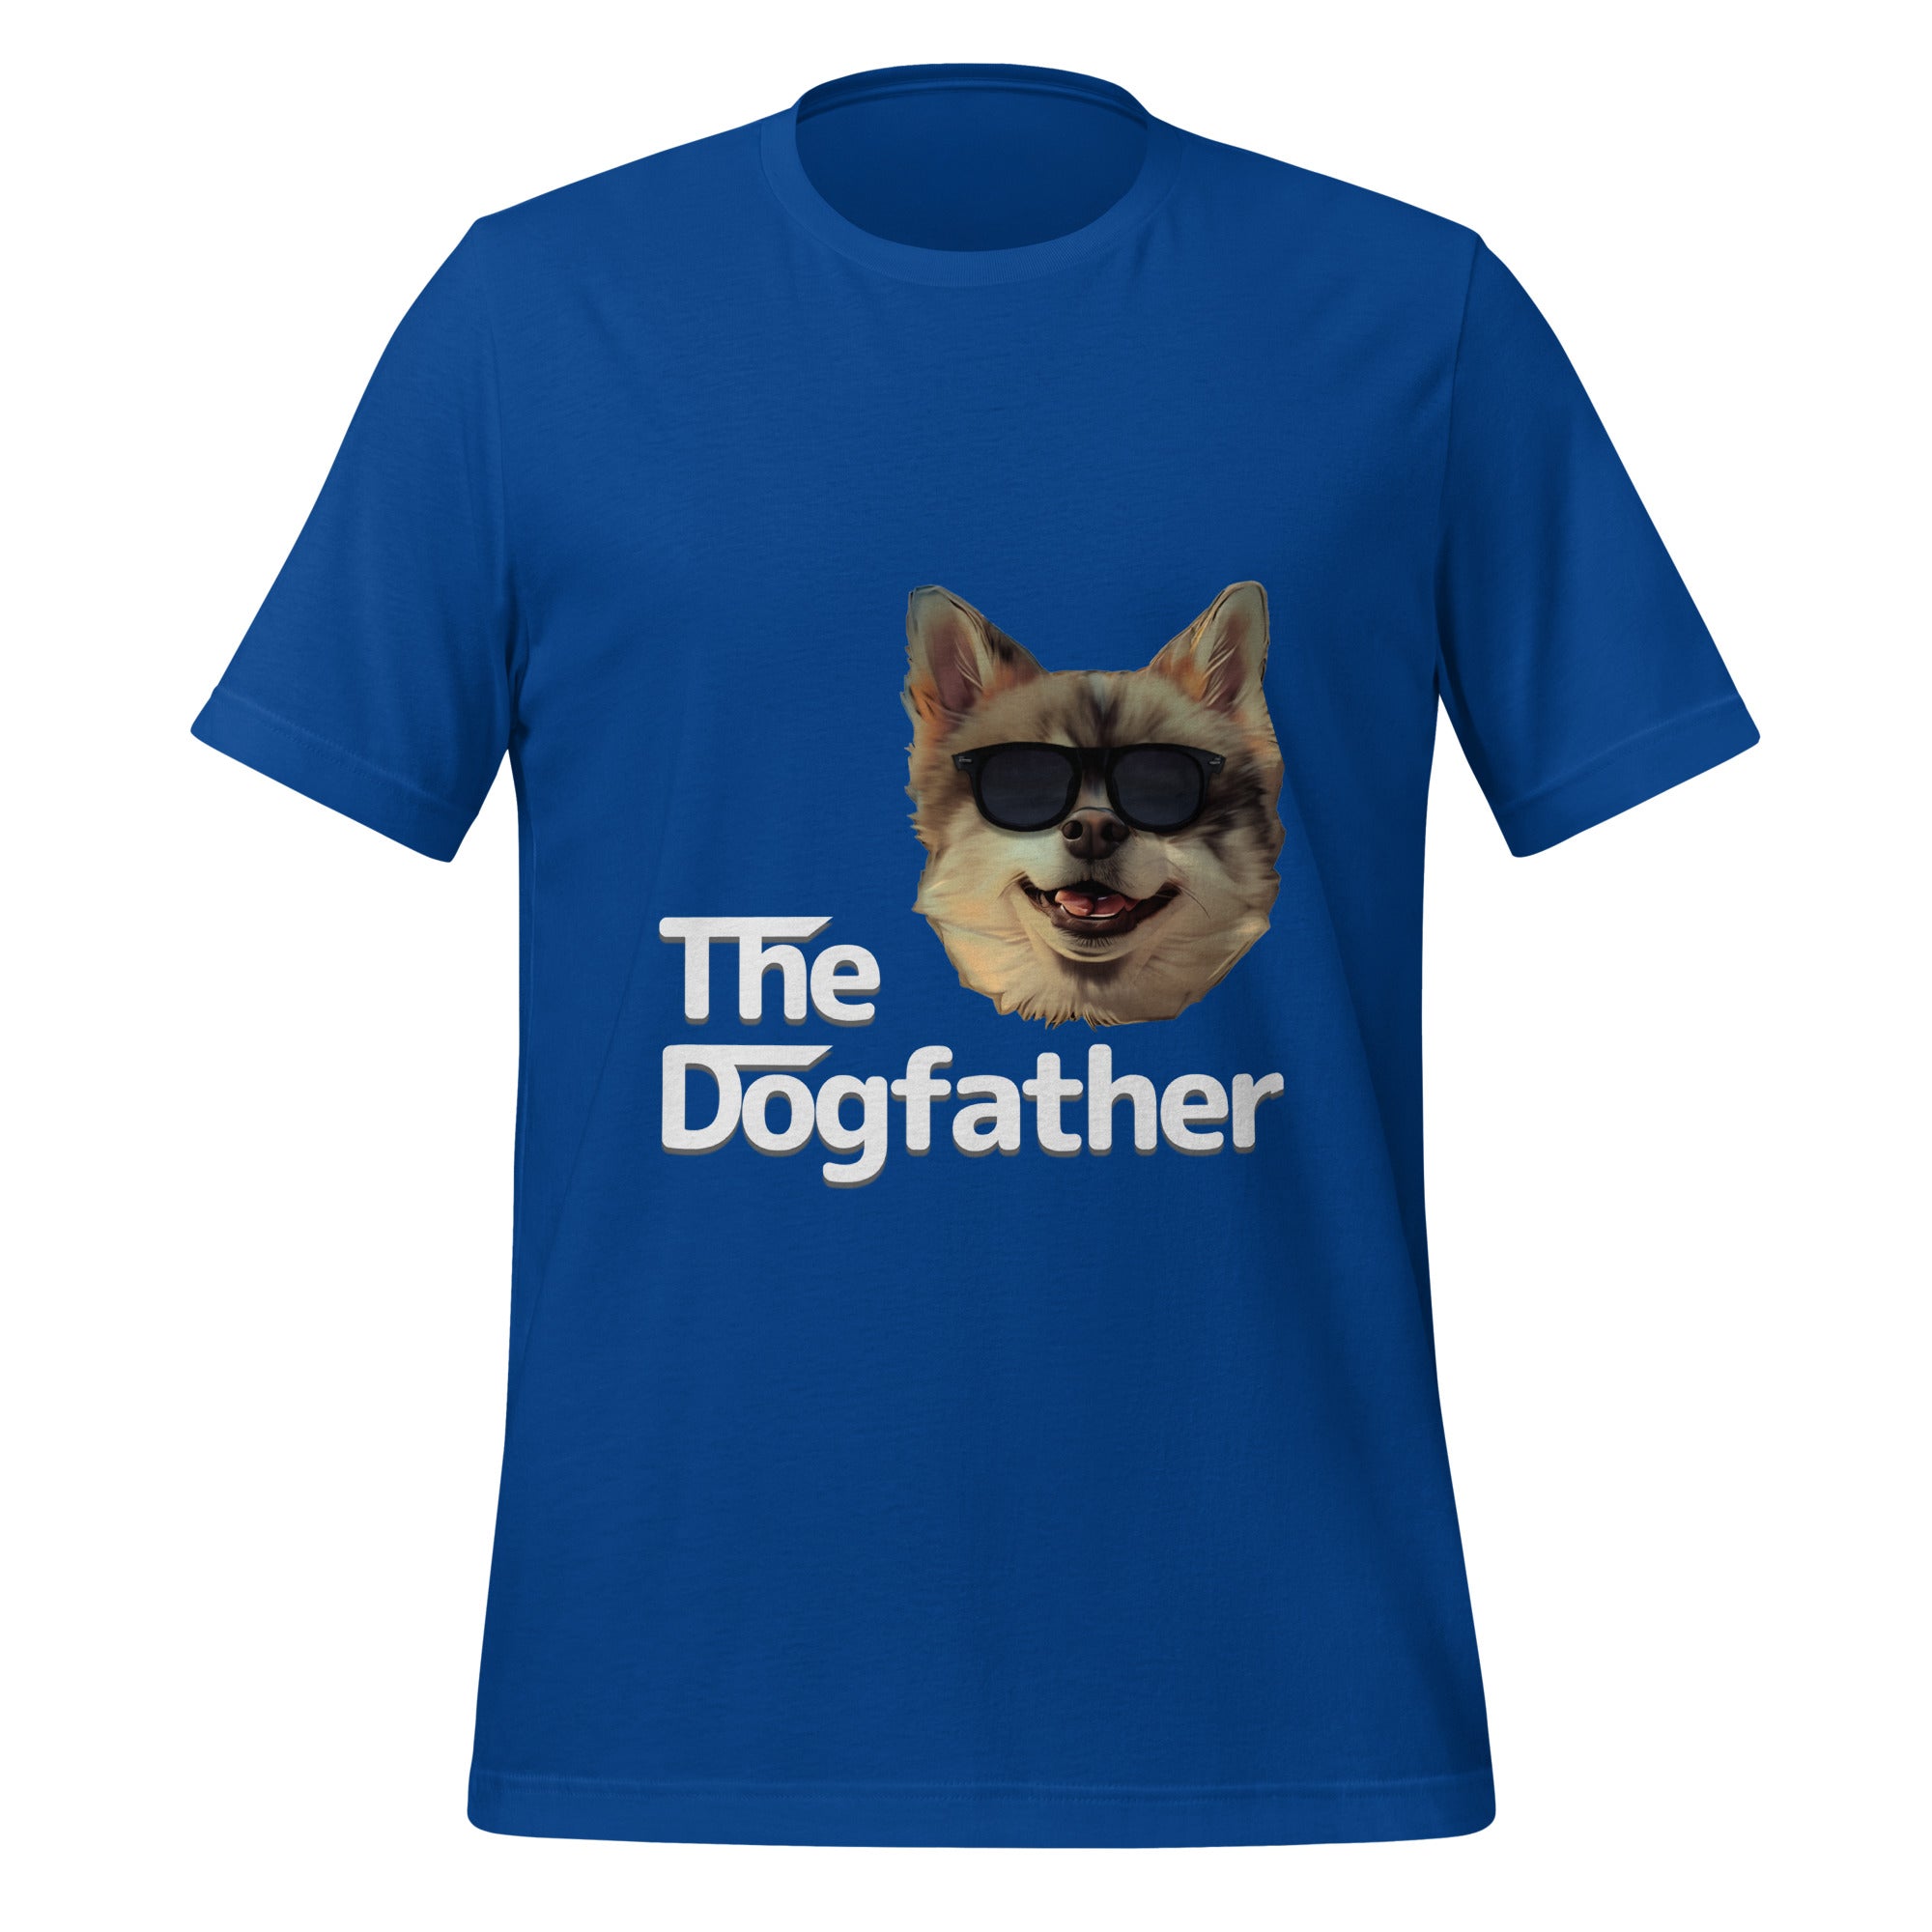 The Dogfather Dark Color Tee